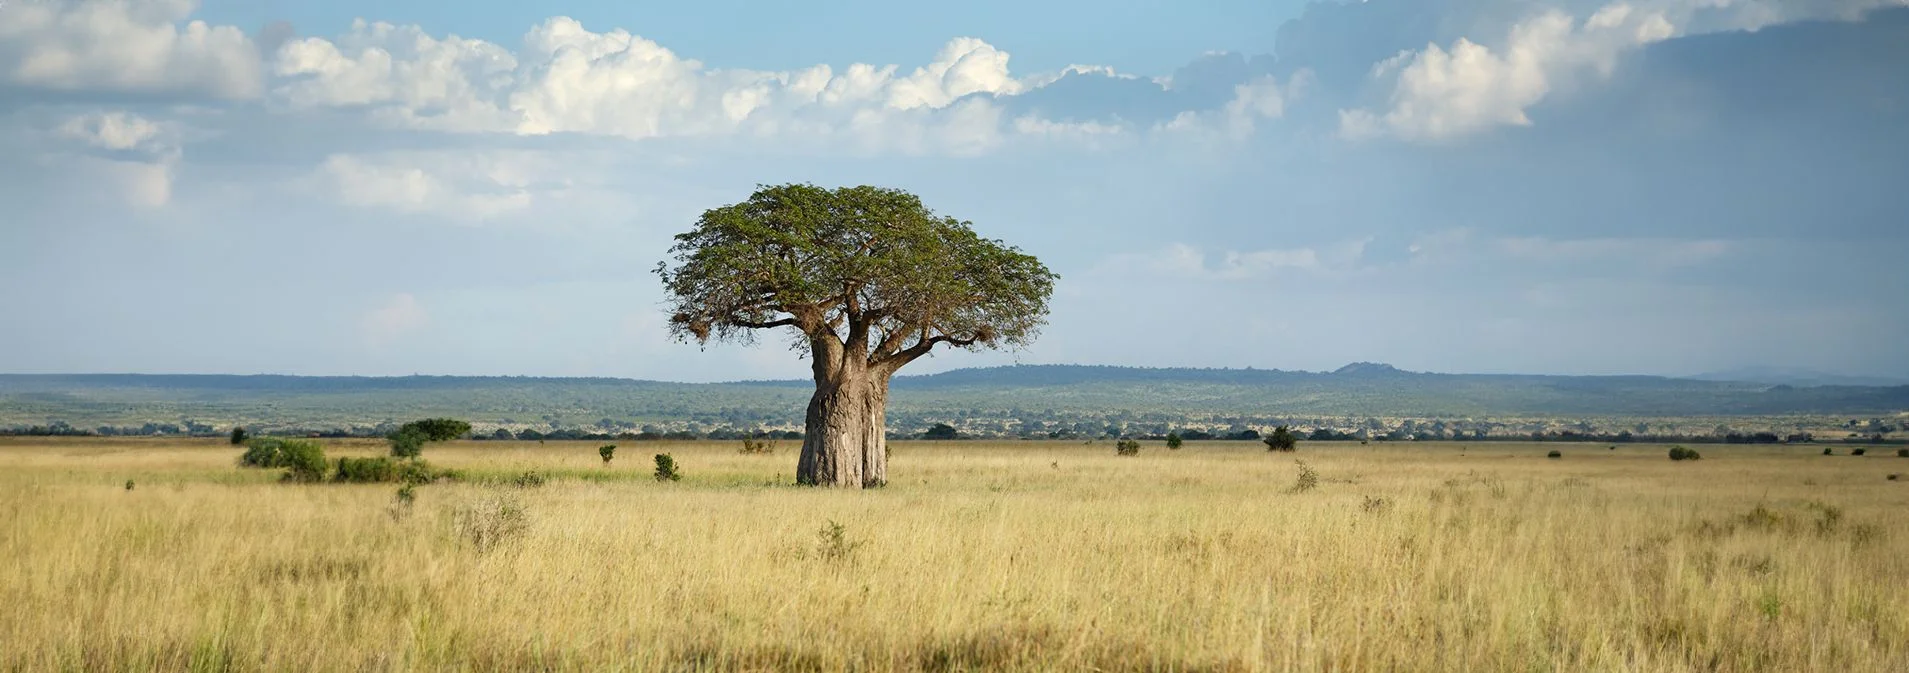 A panoramic shot of a Baobab tree in nature